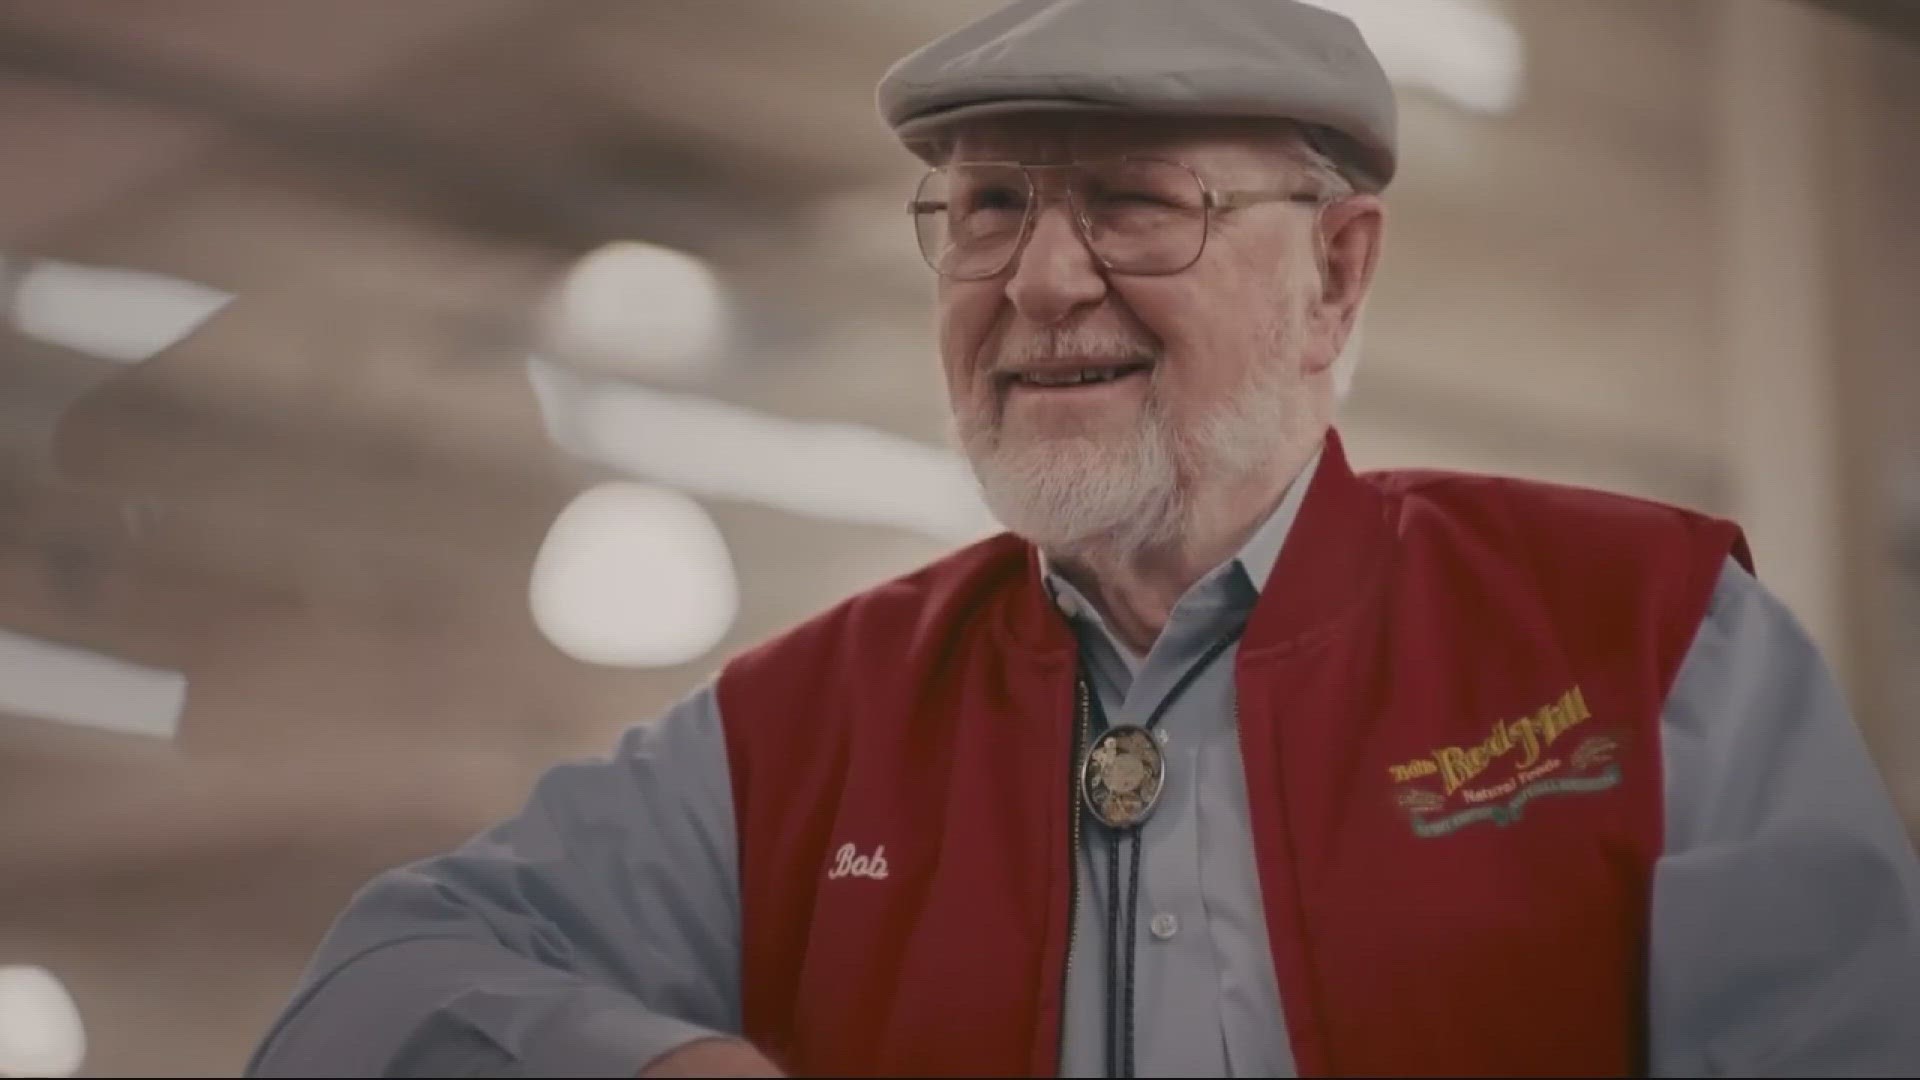 Moore founded Bob's Red Mill 40 years ago, which first served only Portland, then spread to become a natural foods powerhouse.